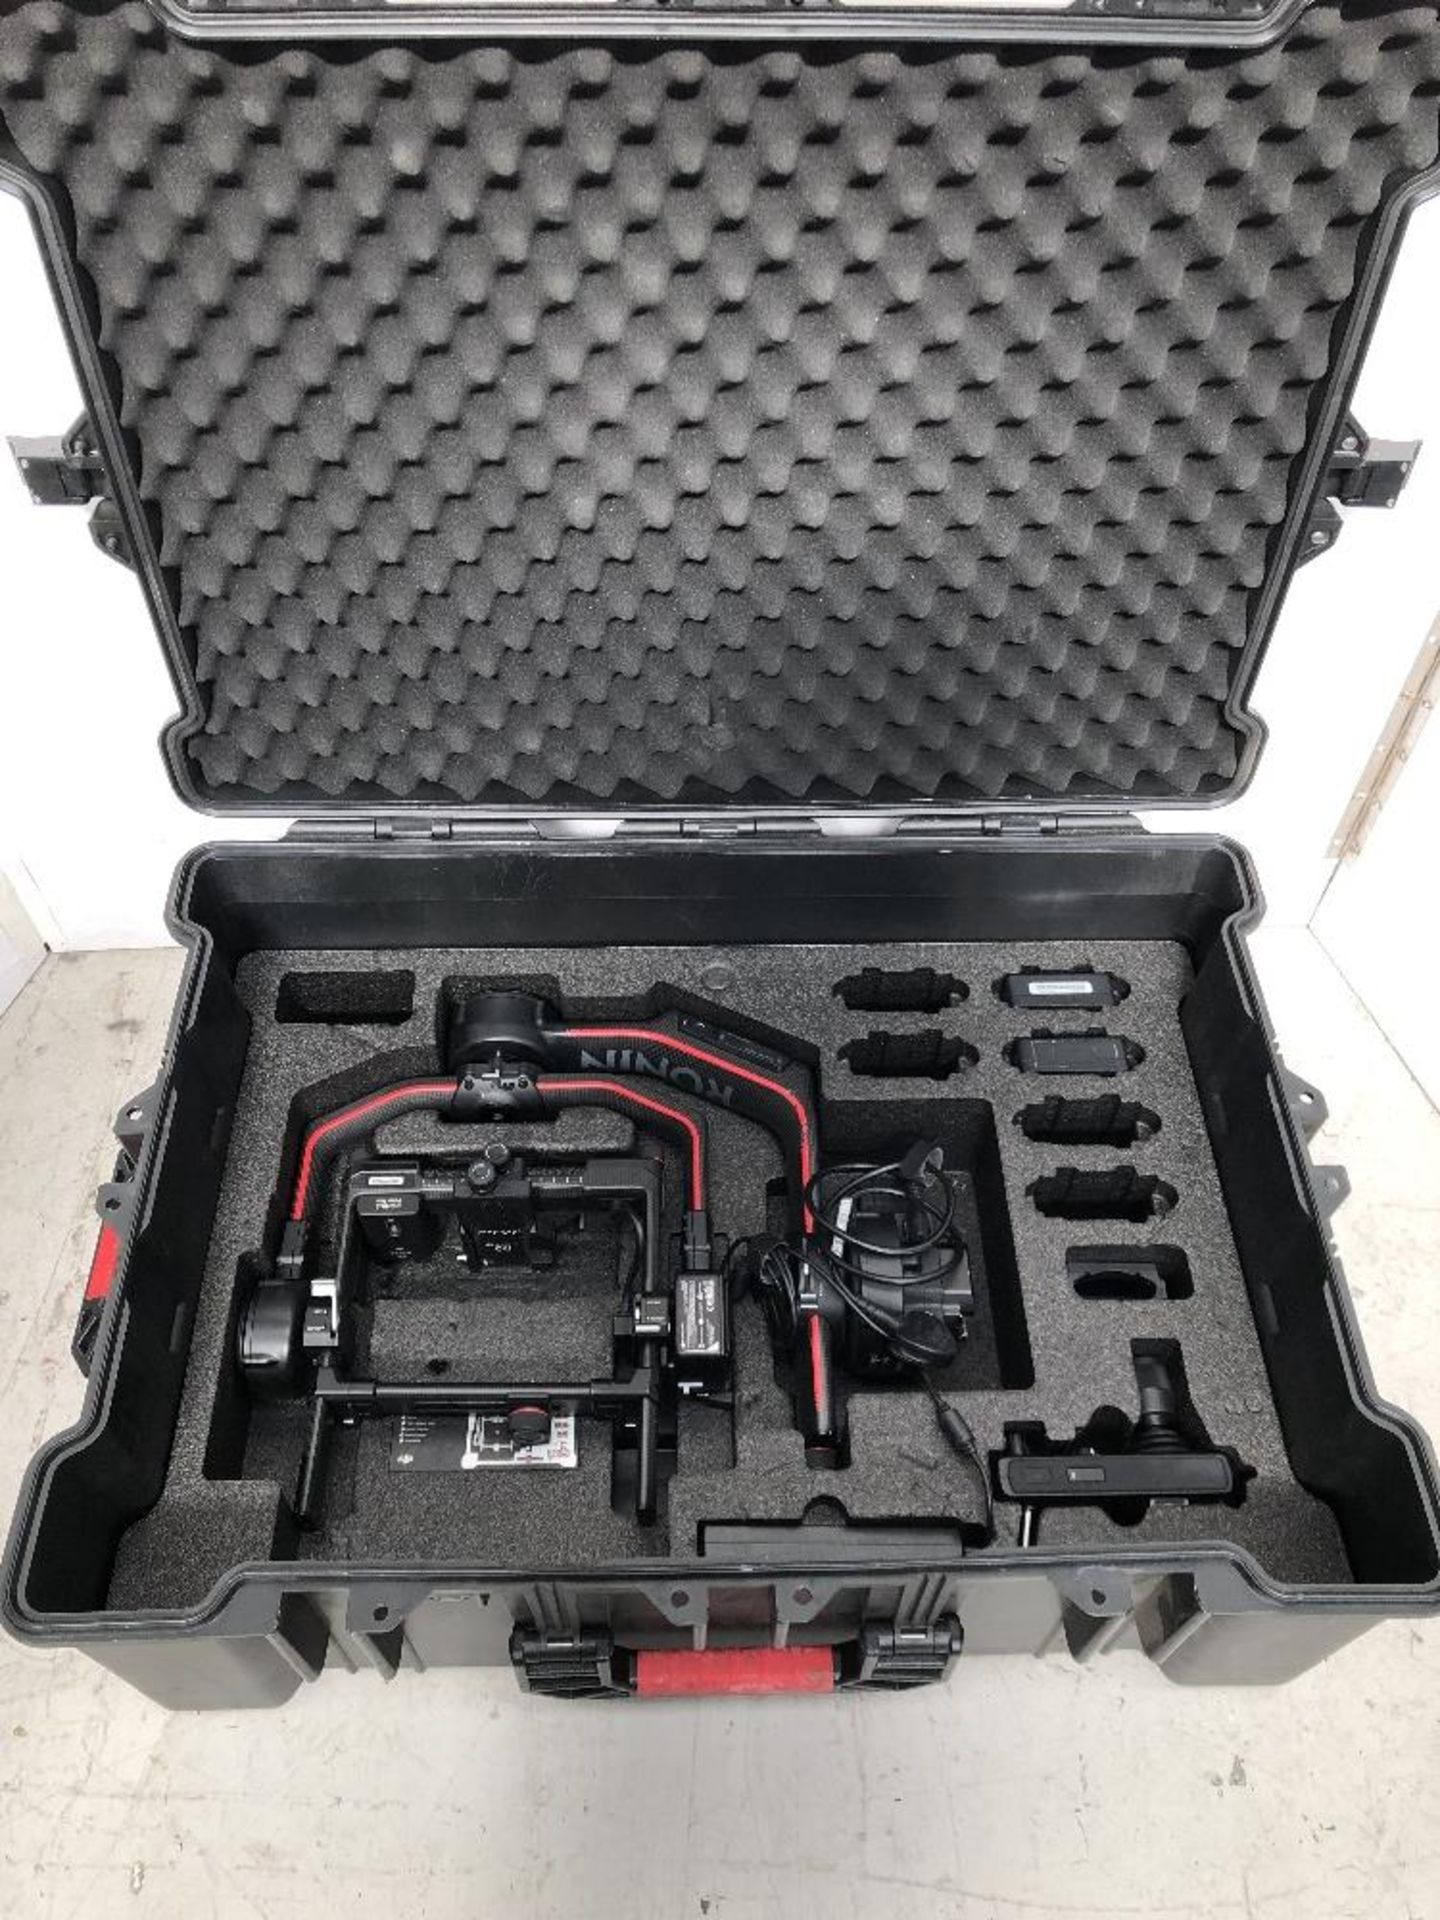 DJI Ronin R2 Professional Combo 3-Axis Compact, Lightweight Stabilized Handheld Gimbal - Image 11 of 12